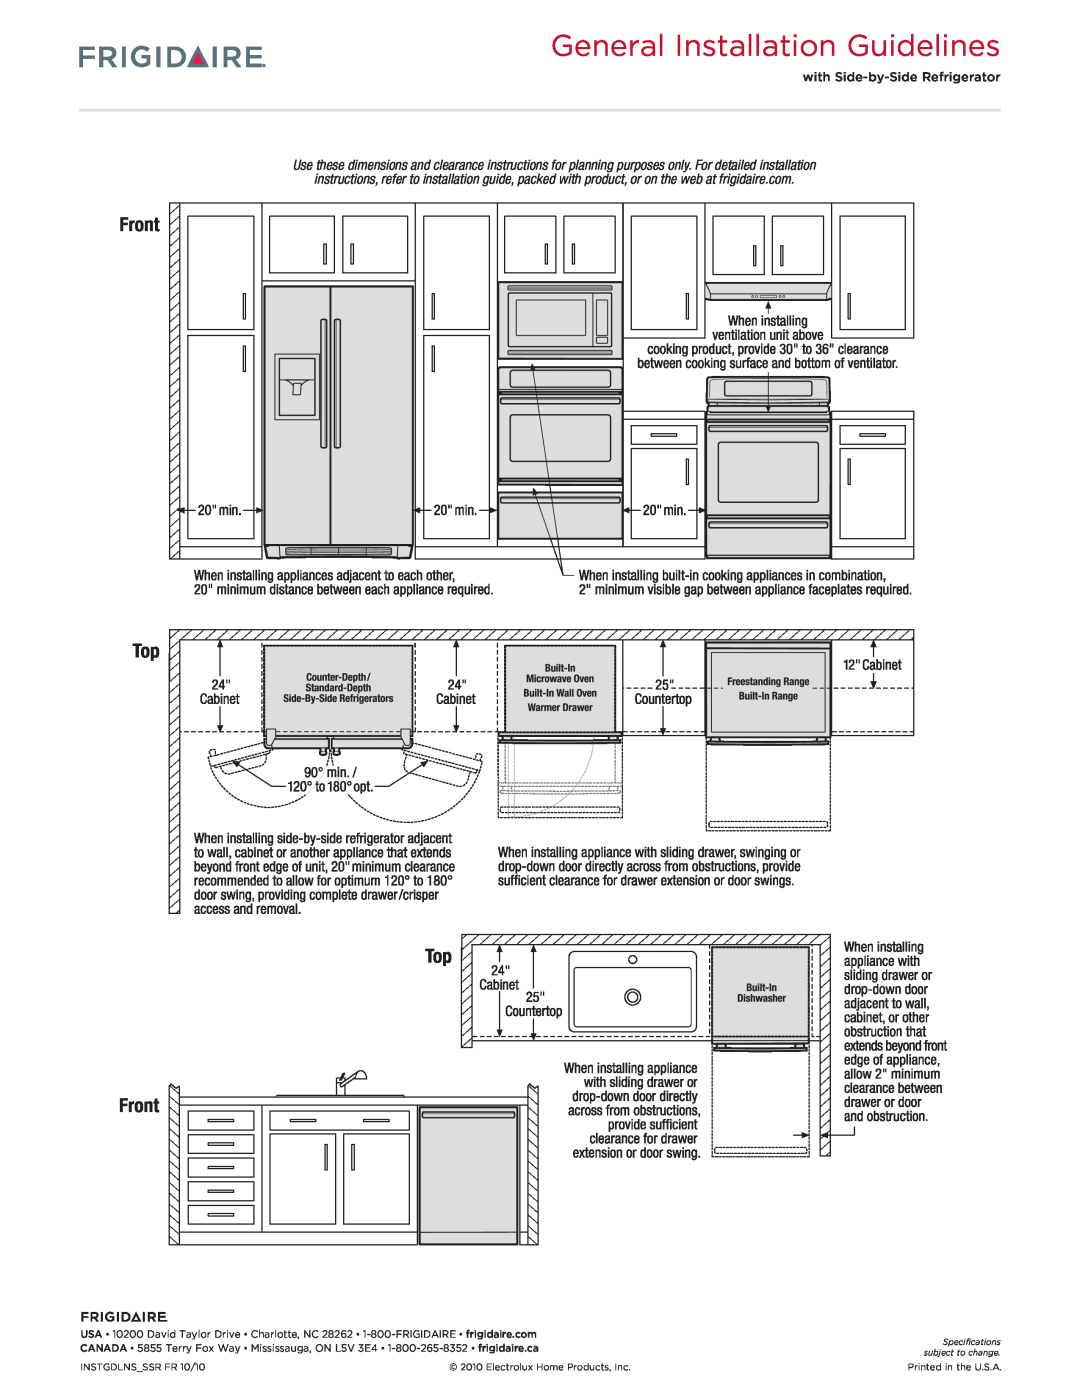 Frigidaire FGUS2676L dimensions General Installation Guidelines, Top Front 